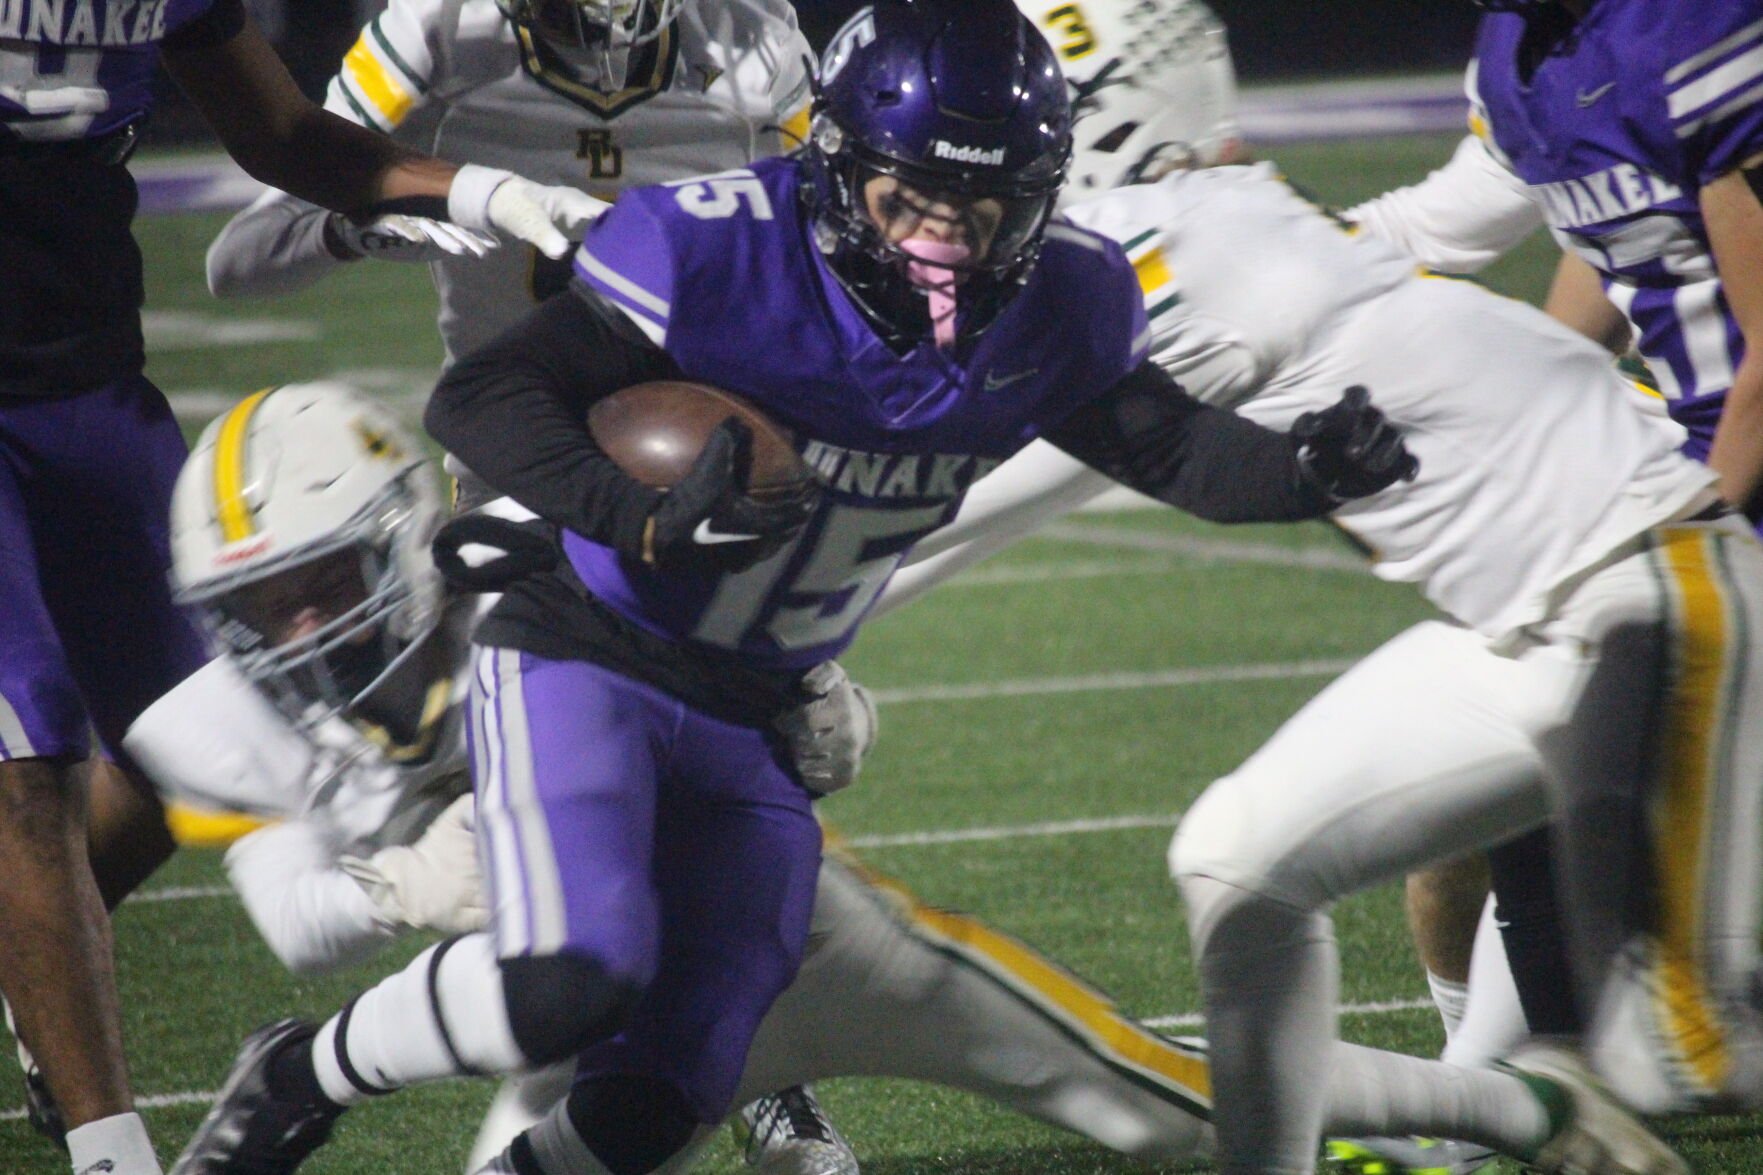 Football: Waunakee loses thrilling state title game in waning seconds